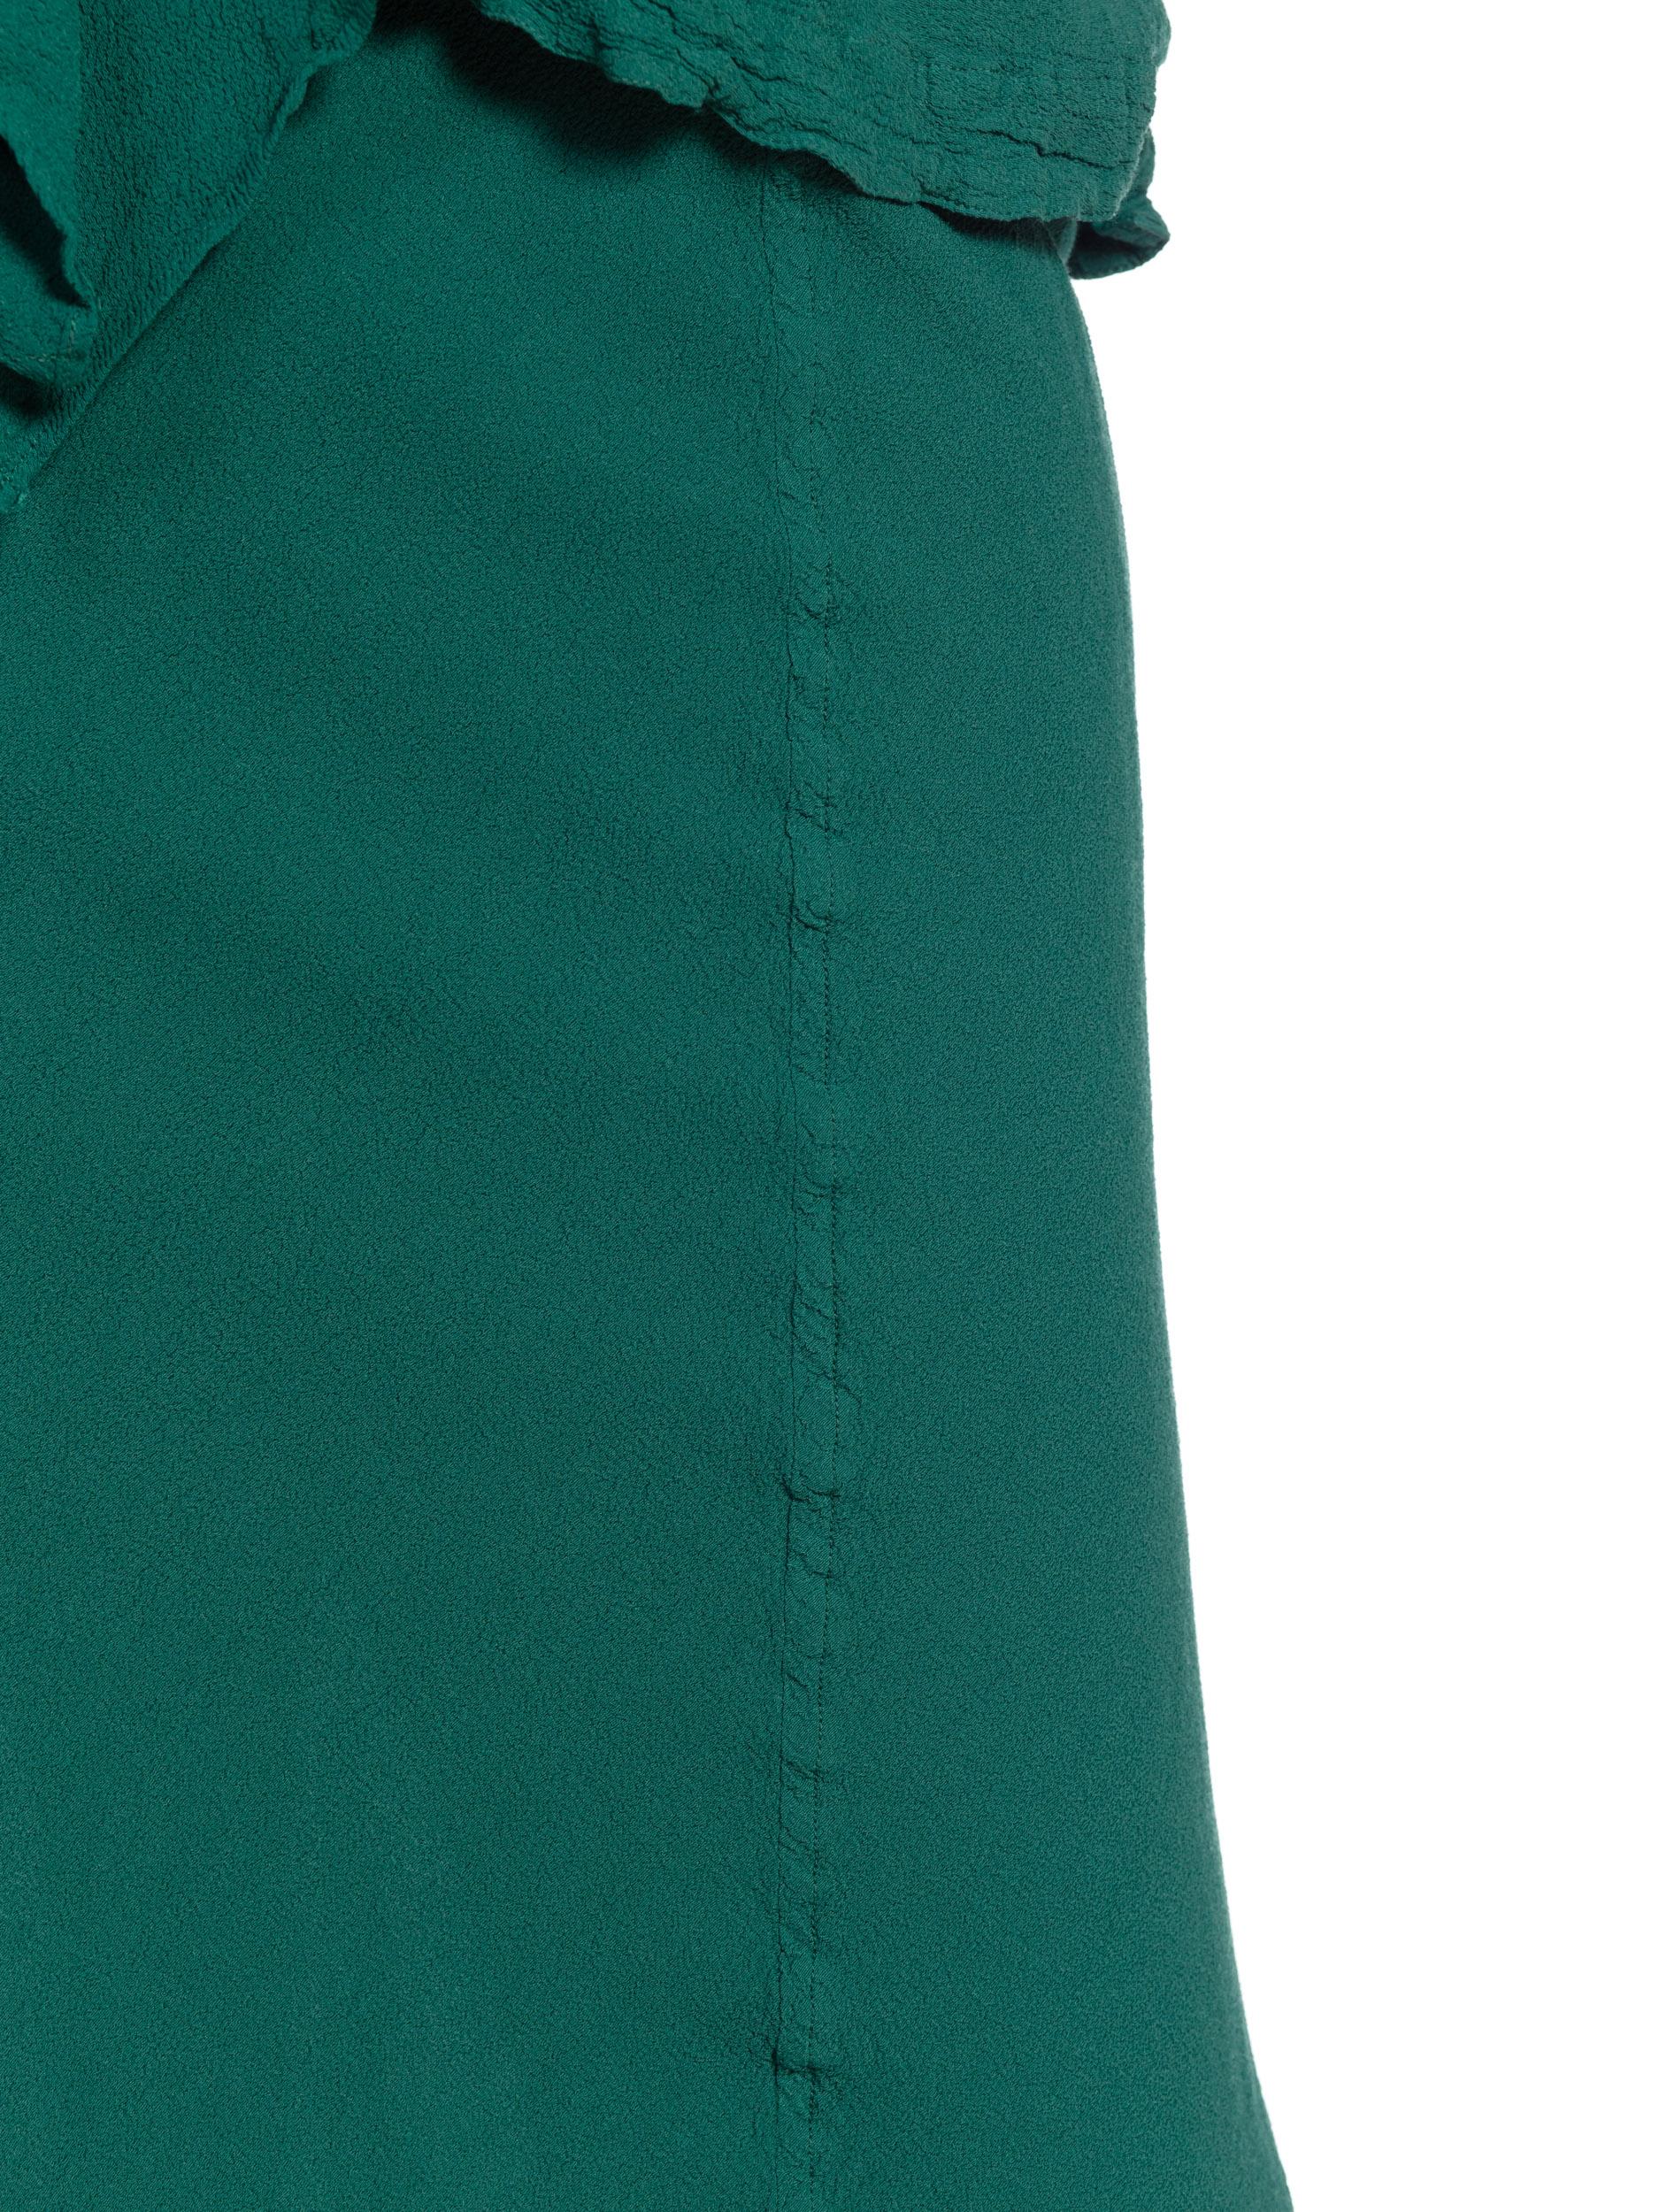 1990s Ghost Bottle Green Bias Rayon Crepe 3-Piece Skirt, Cami & Top 11